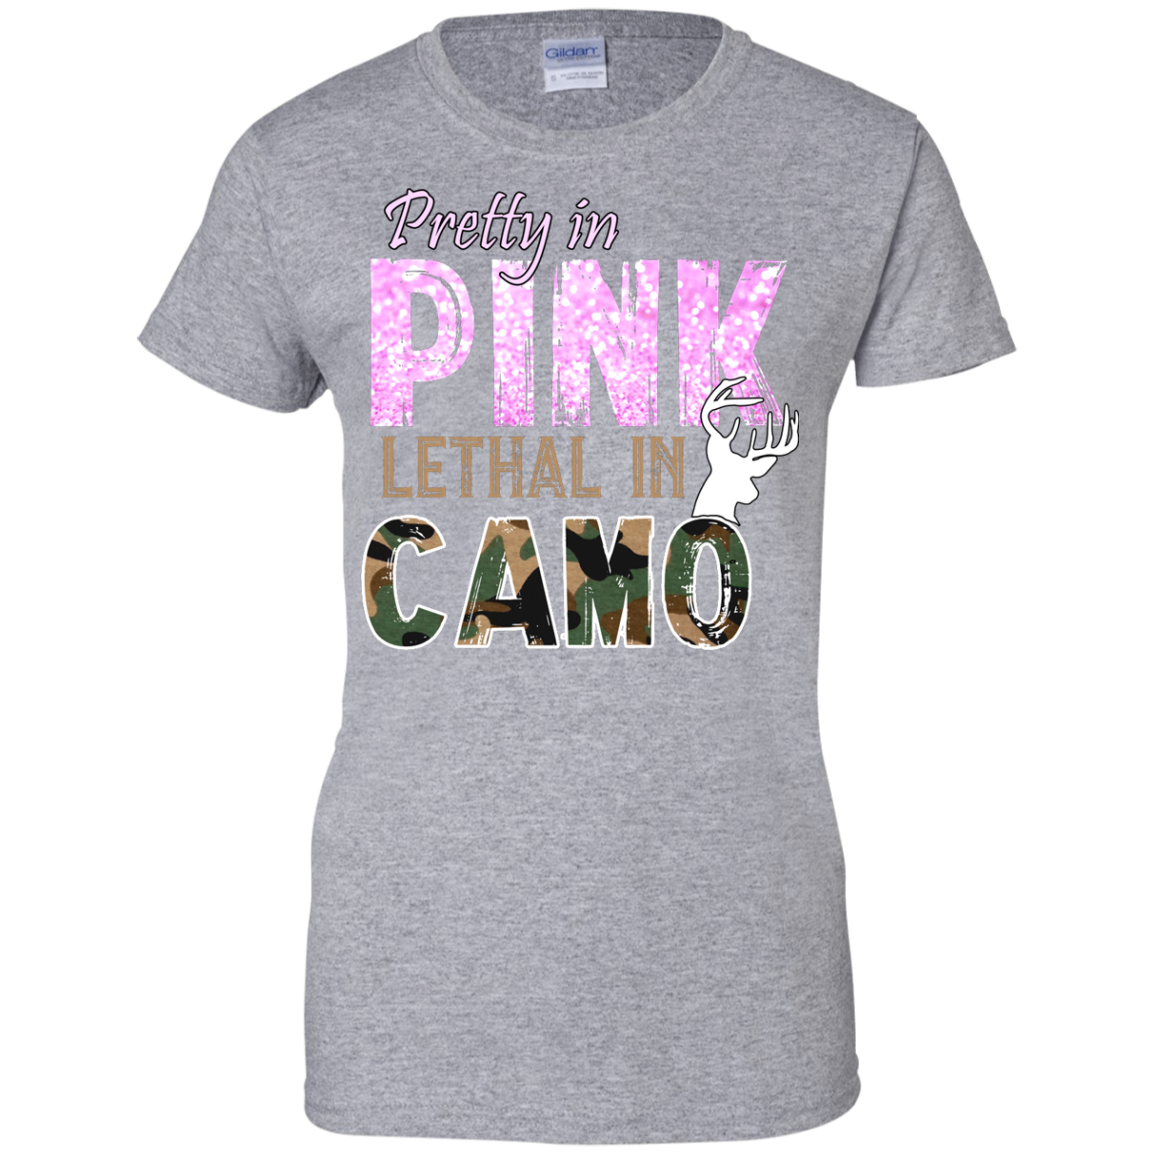 "Pretty In Pink. Lethal In Camo" Gildan Ladies' 100% Cotton T-Shirt